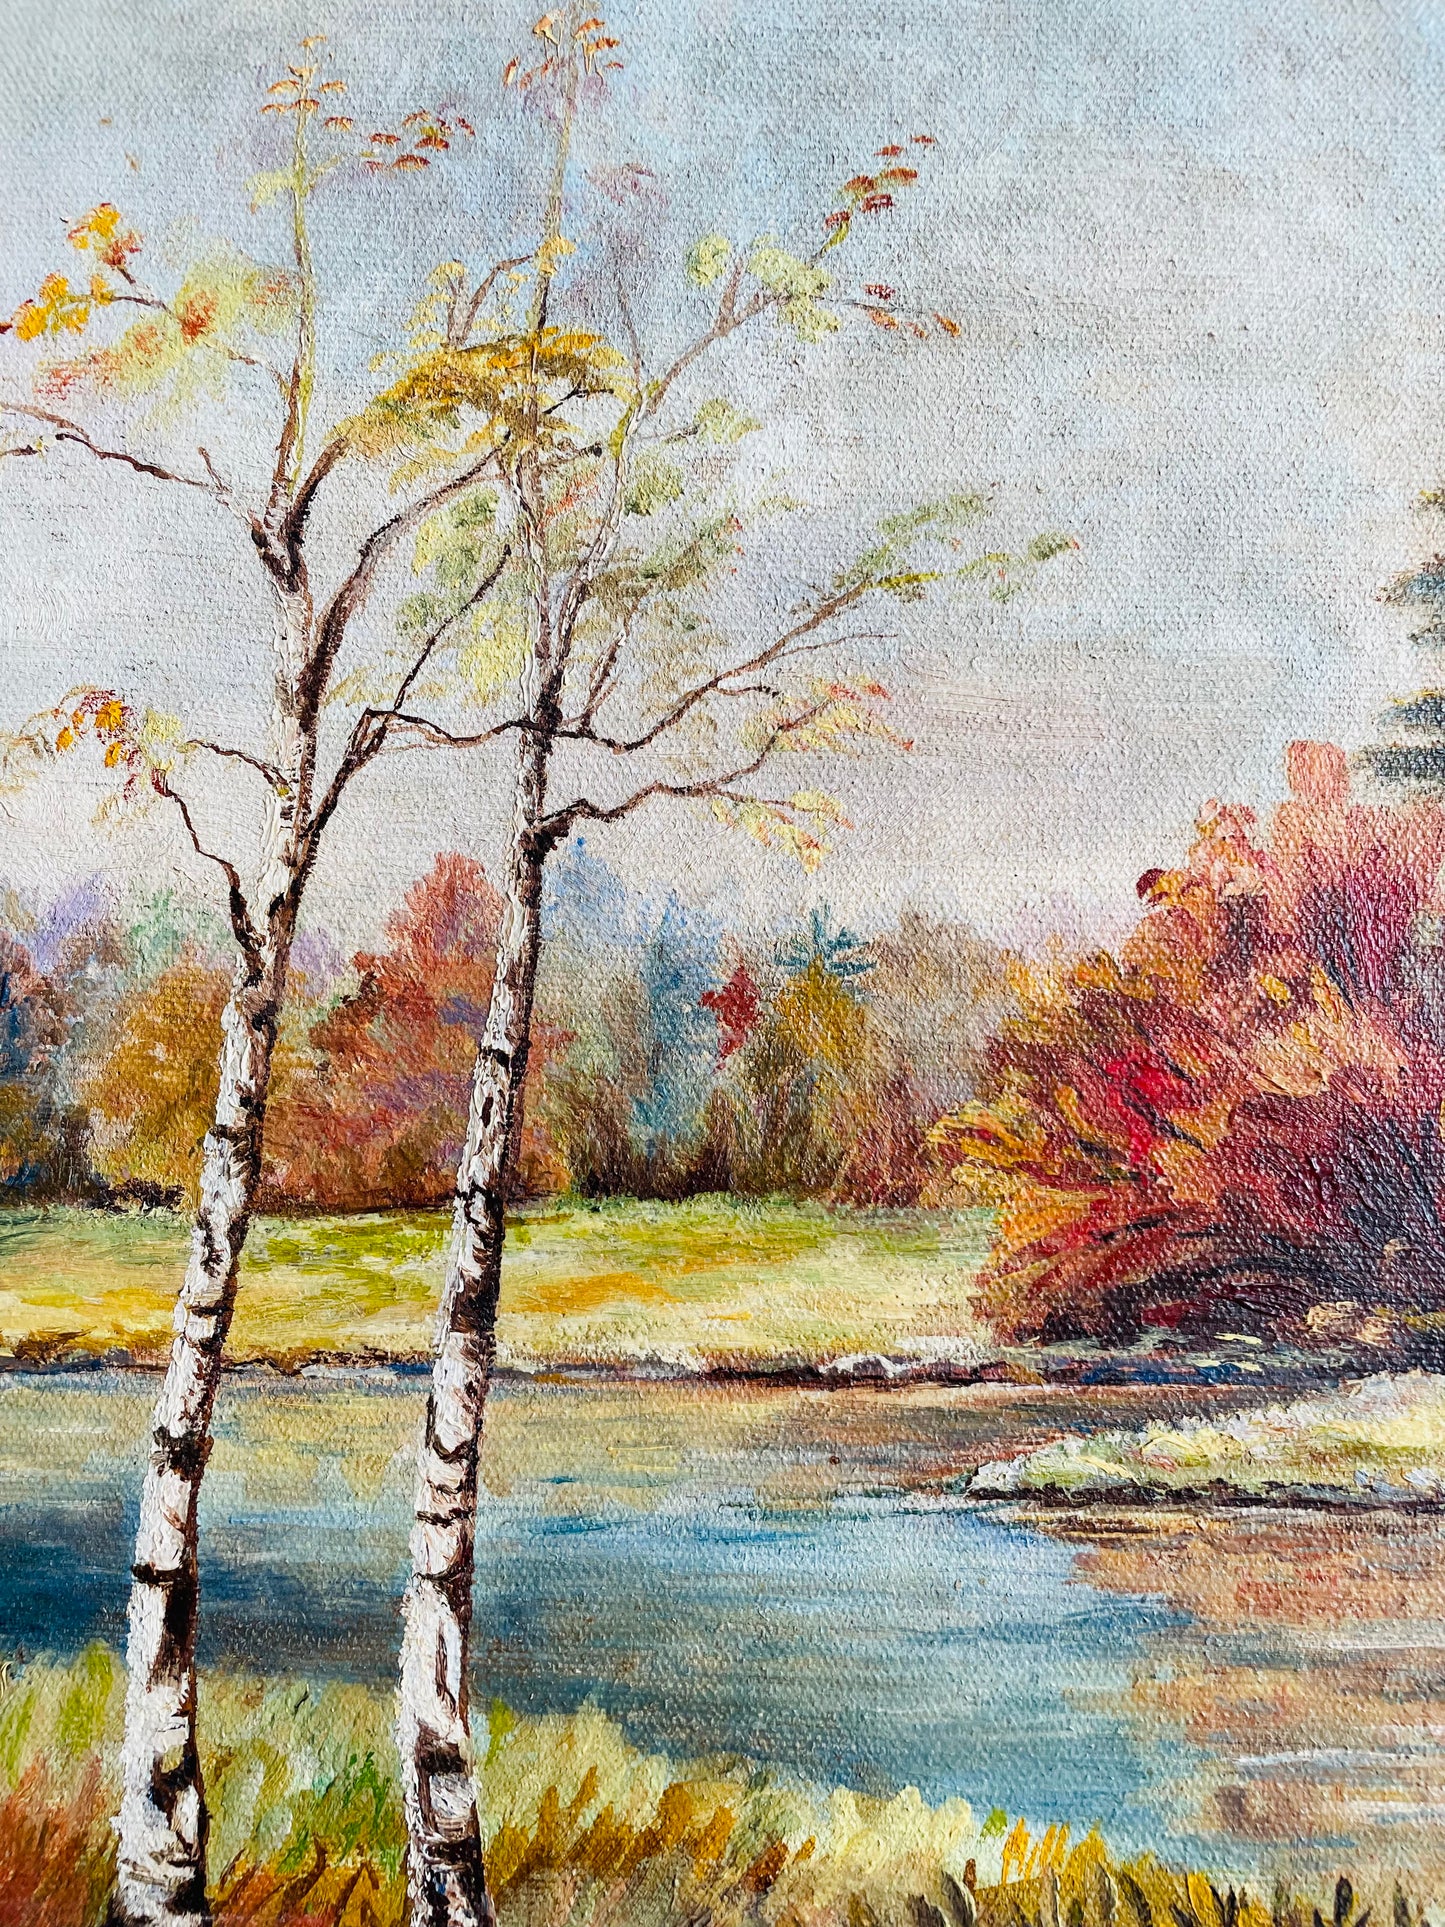 Original Art - Autumn Nature Scene Painting with Forest & Stream - Signed A. Miller